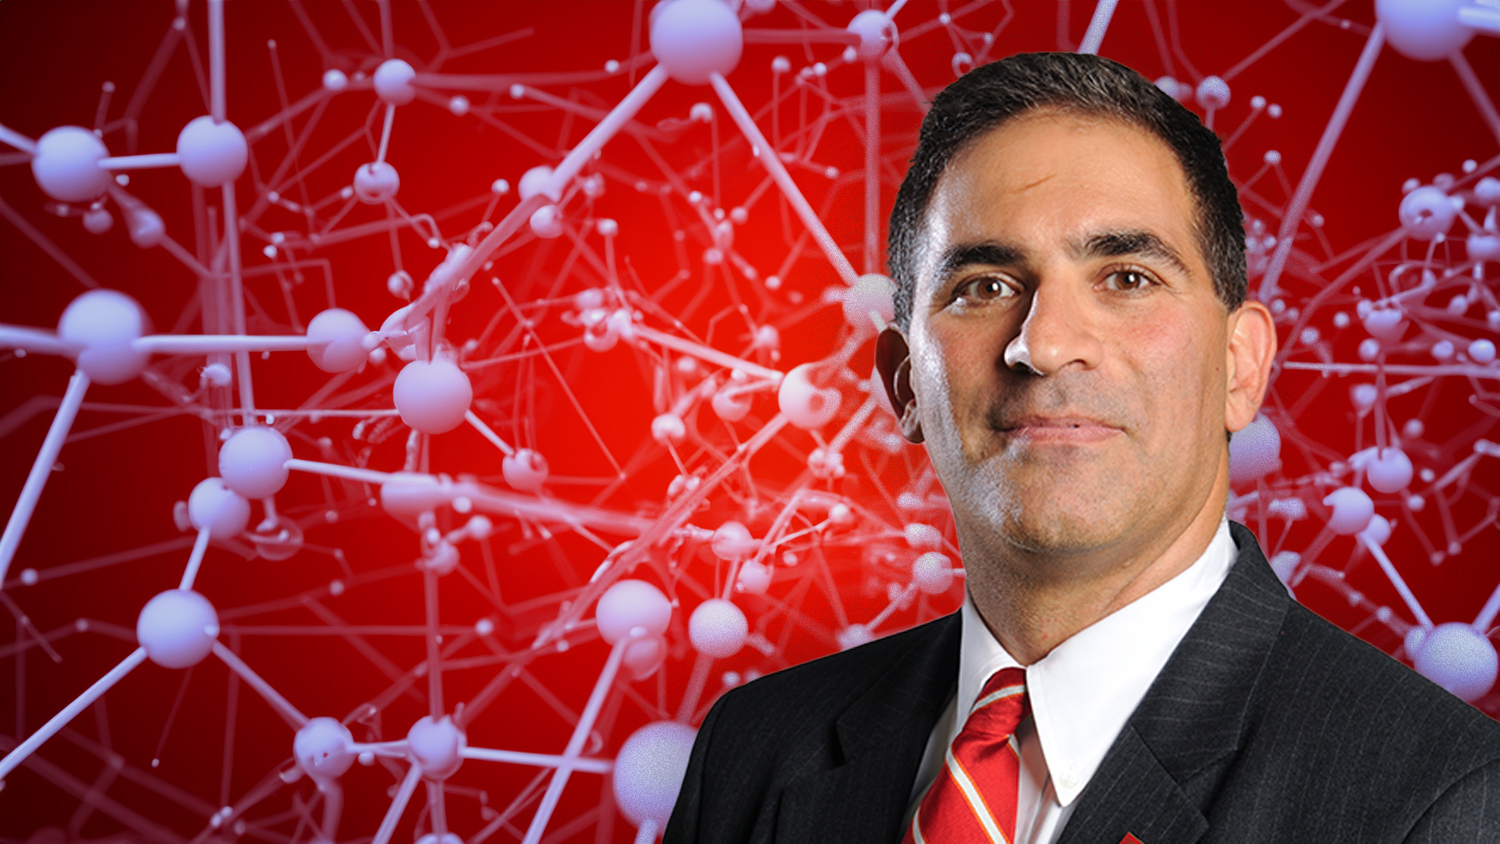 Image of Justin Schwartz on a red background and connected molecules in greyish-white.